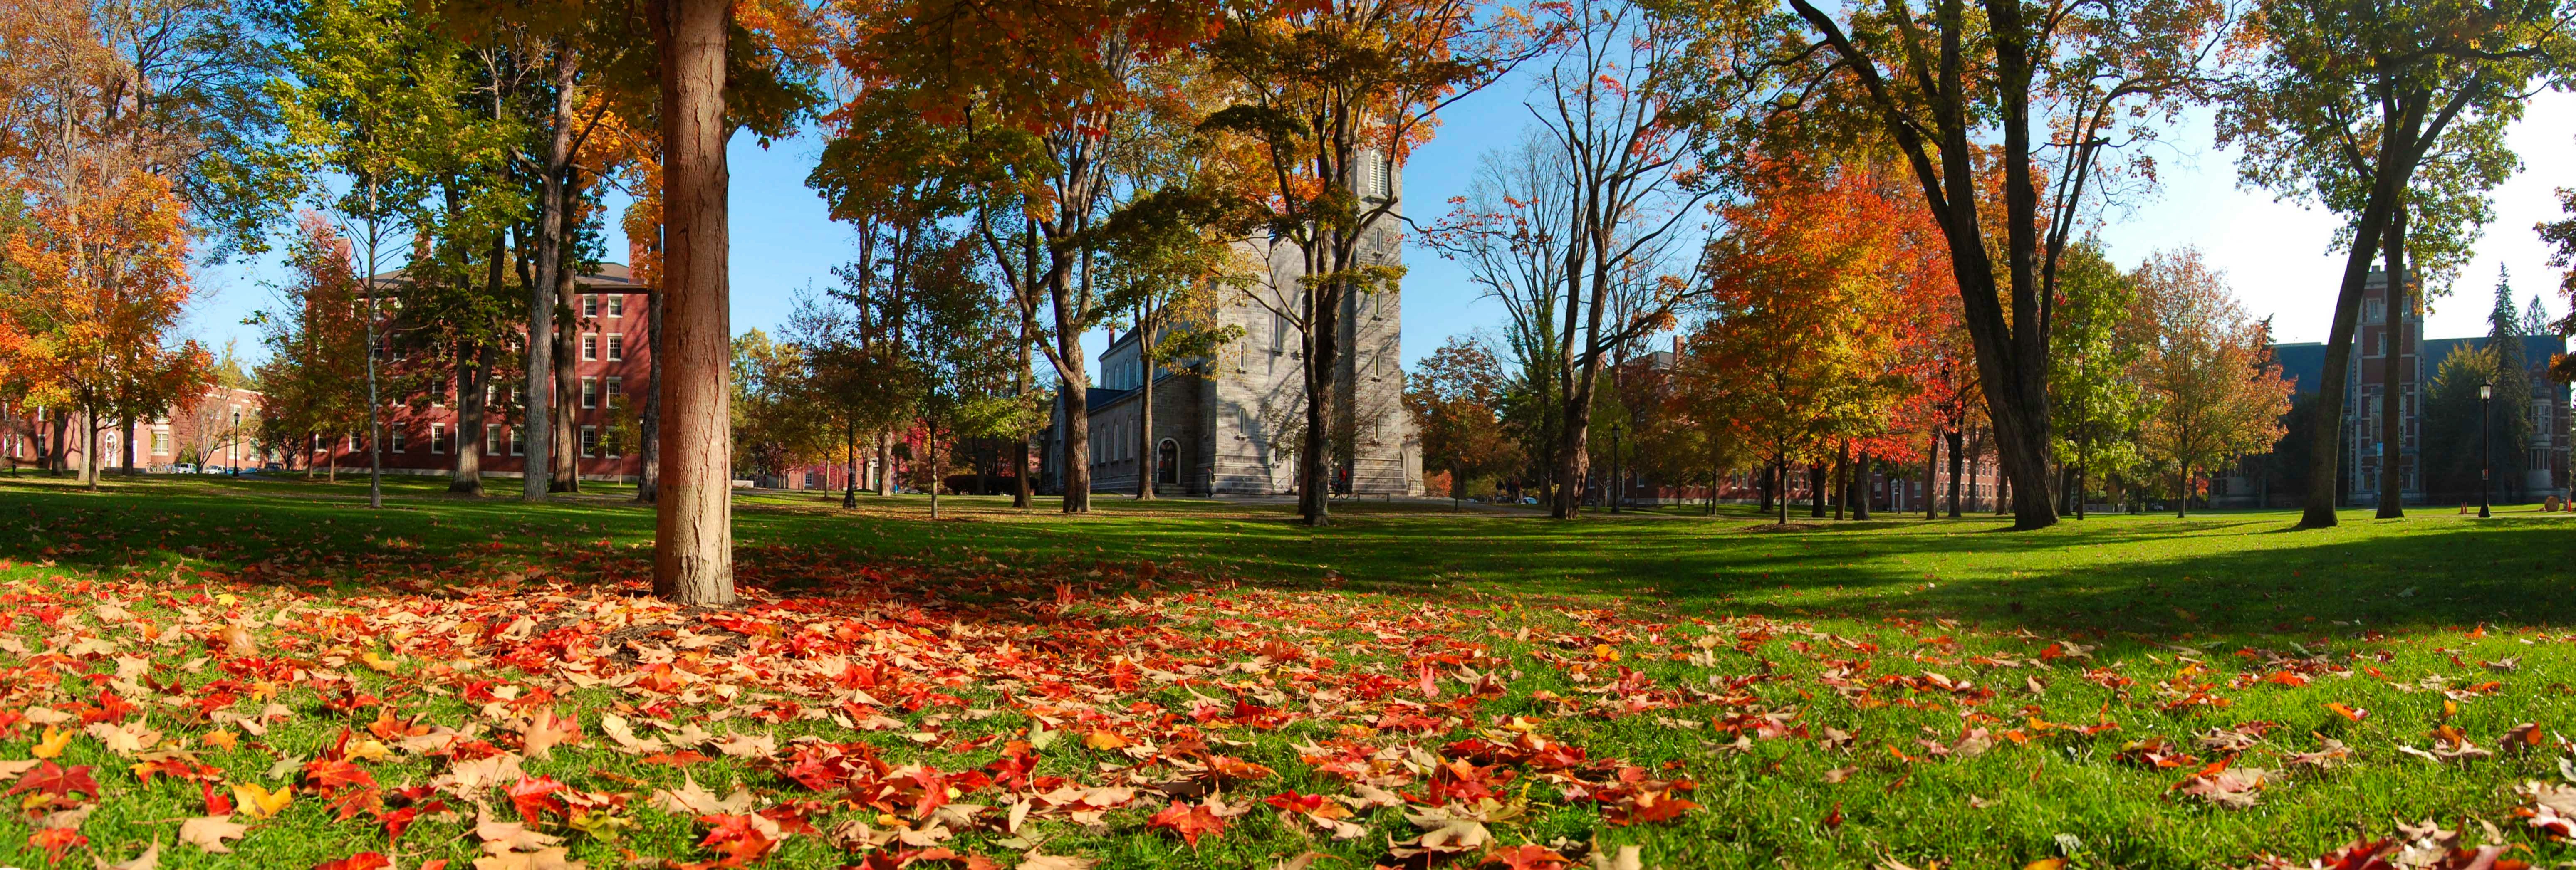 Bowdoin College - Admission Requirements, SAT, ACT, GPA and chance of  acceptance